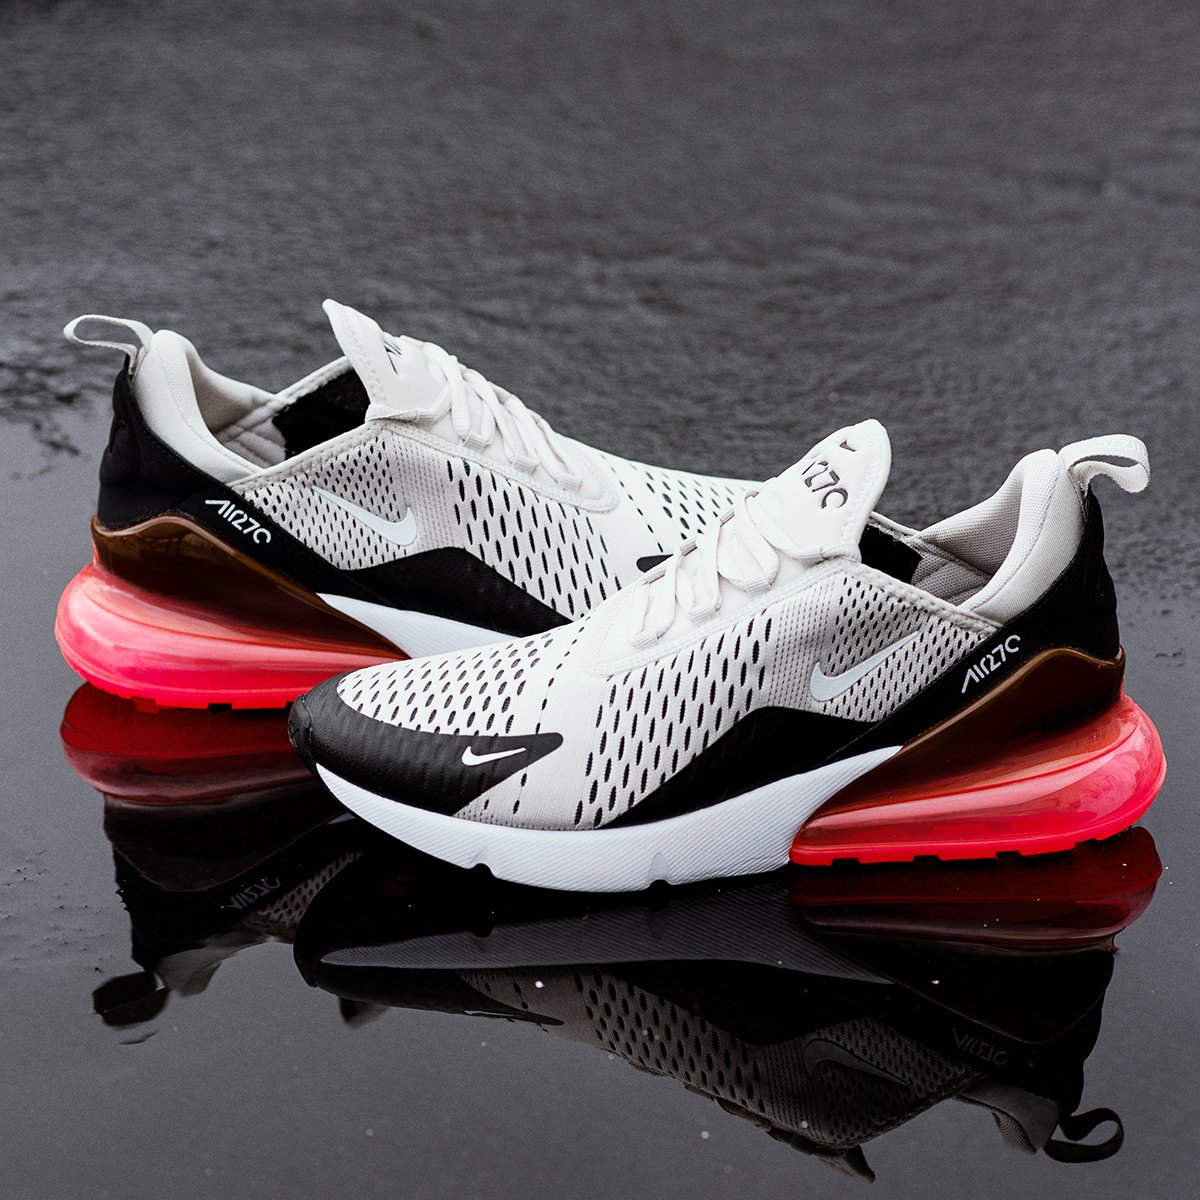 270s black and red